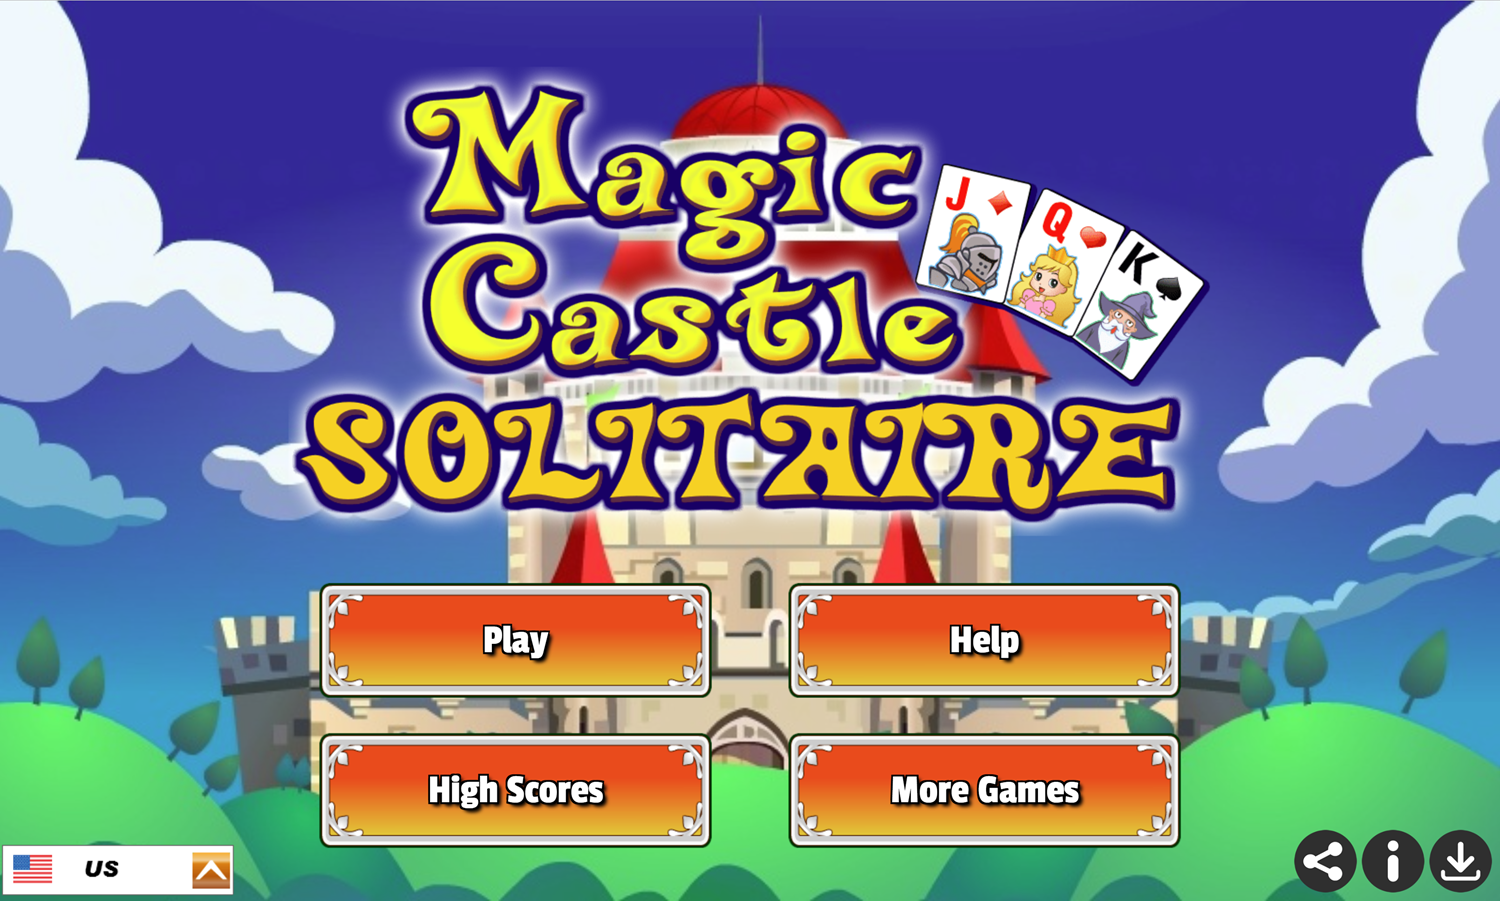 Magic Castle Solitaire Game Welcome Screen Screenshot.